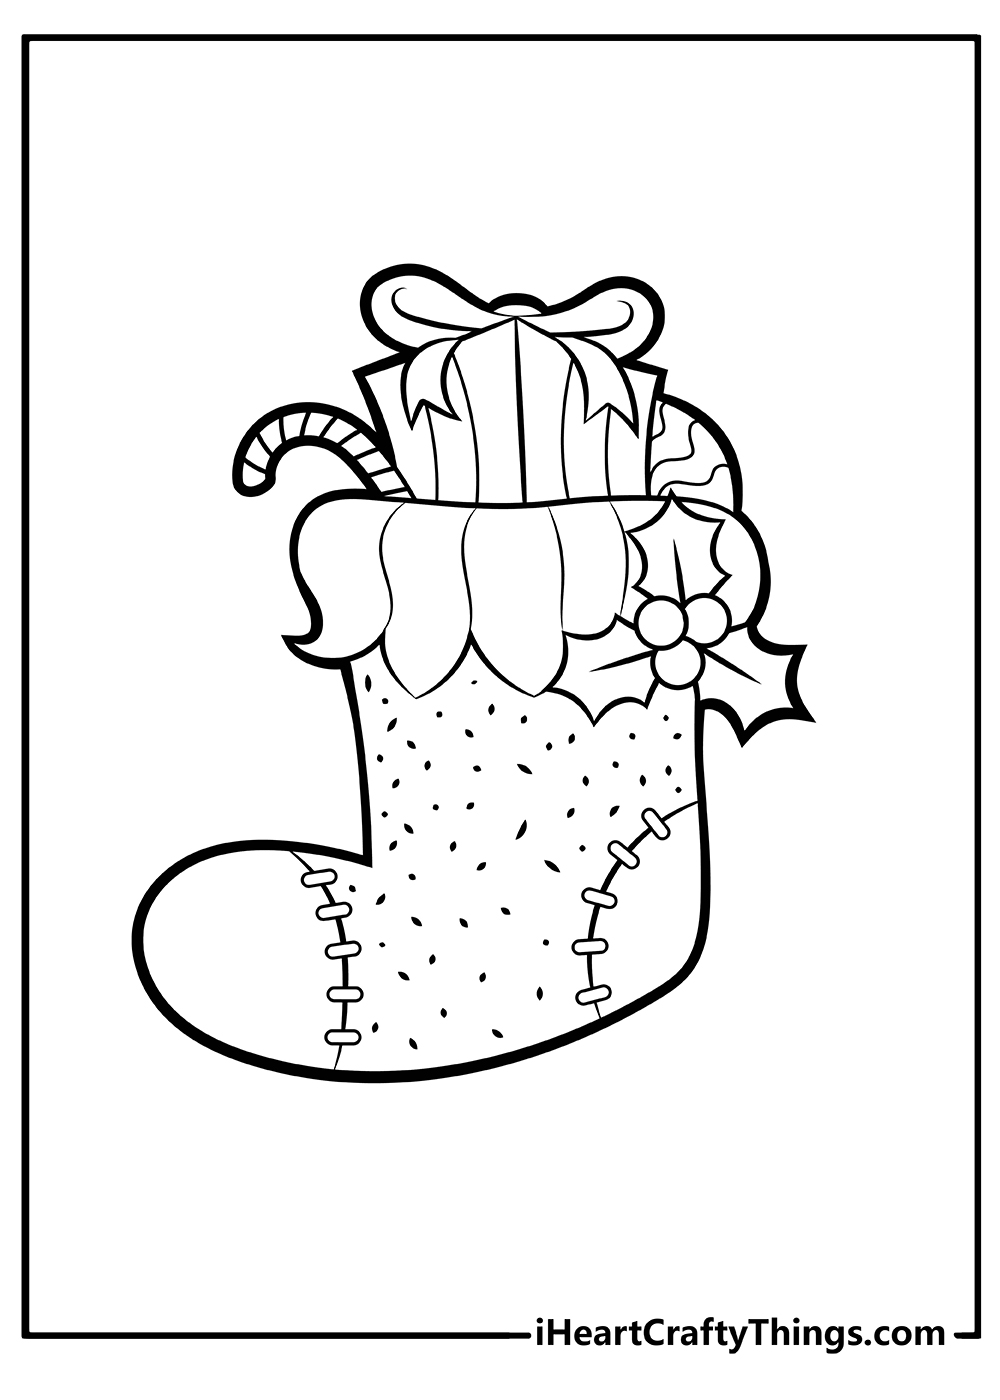 Christmas Coloring Pages for kids free download